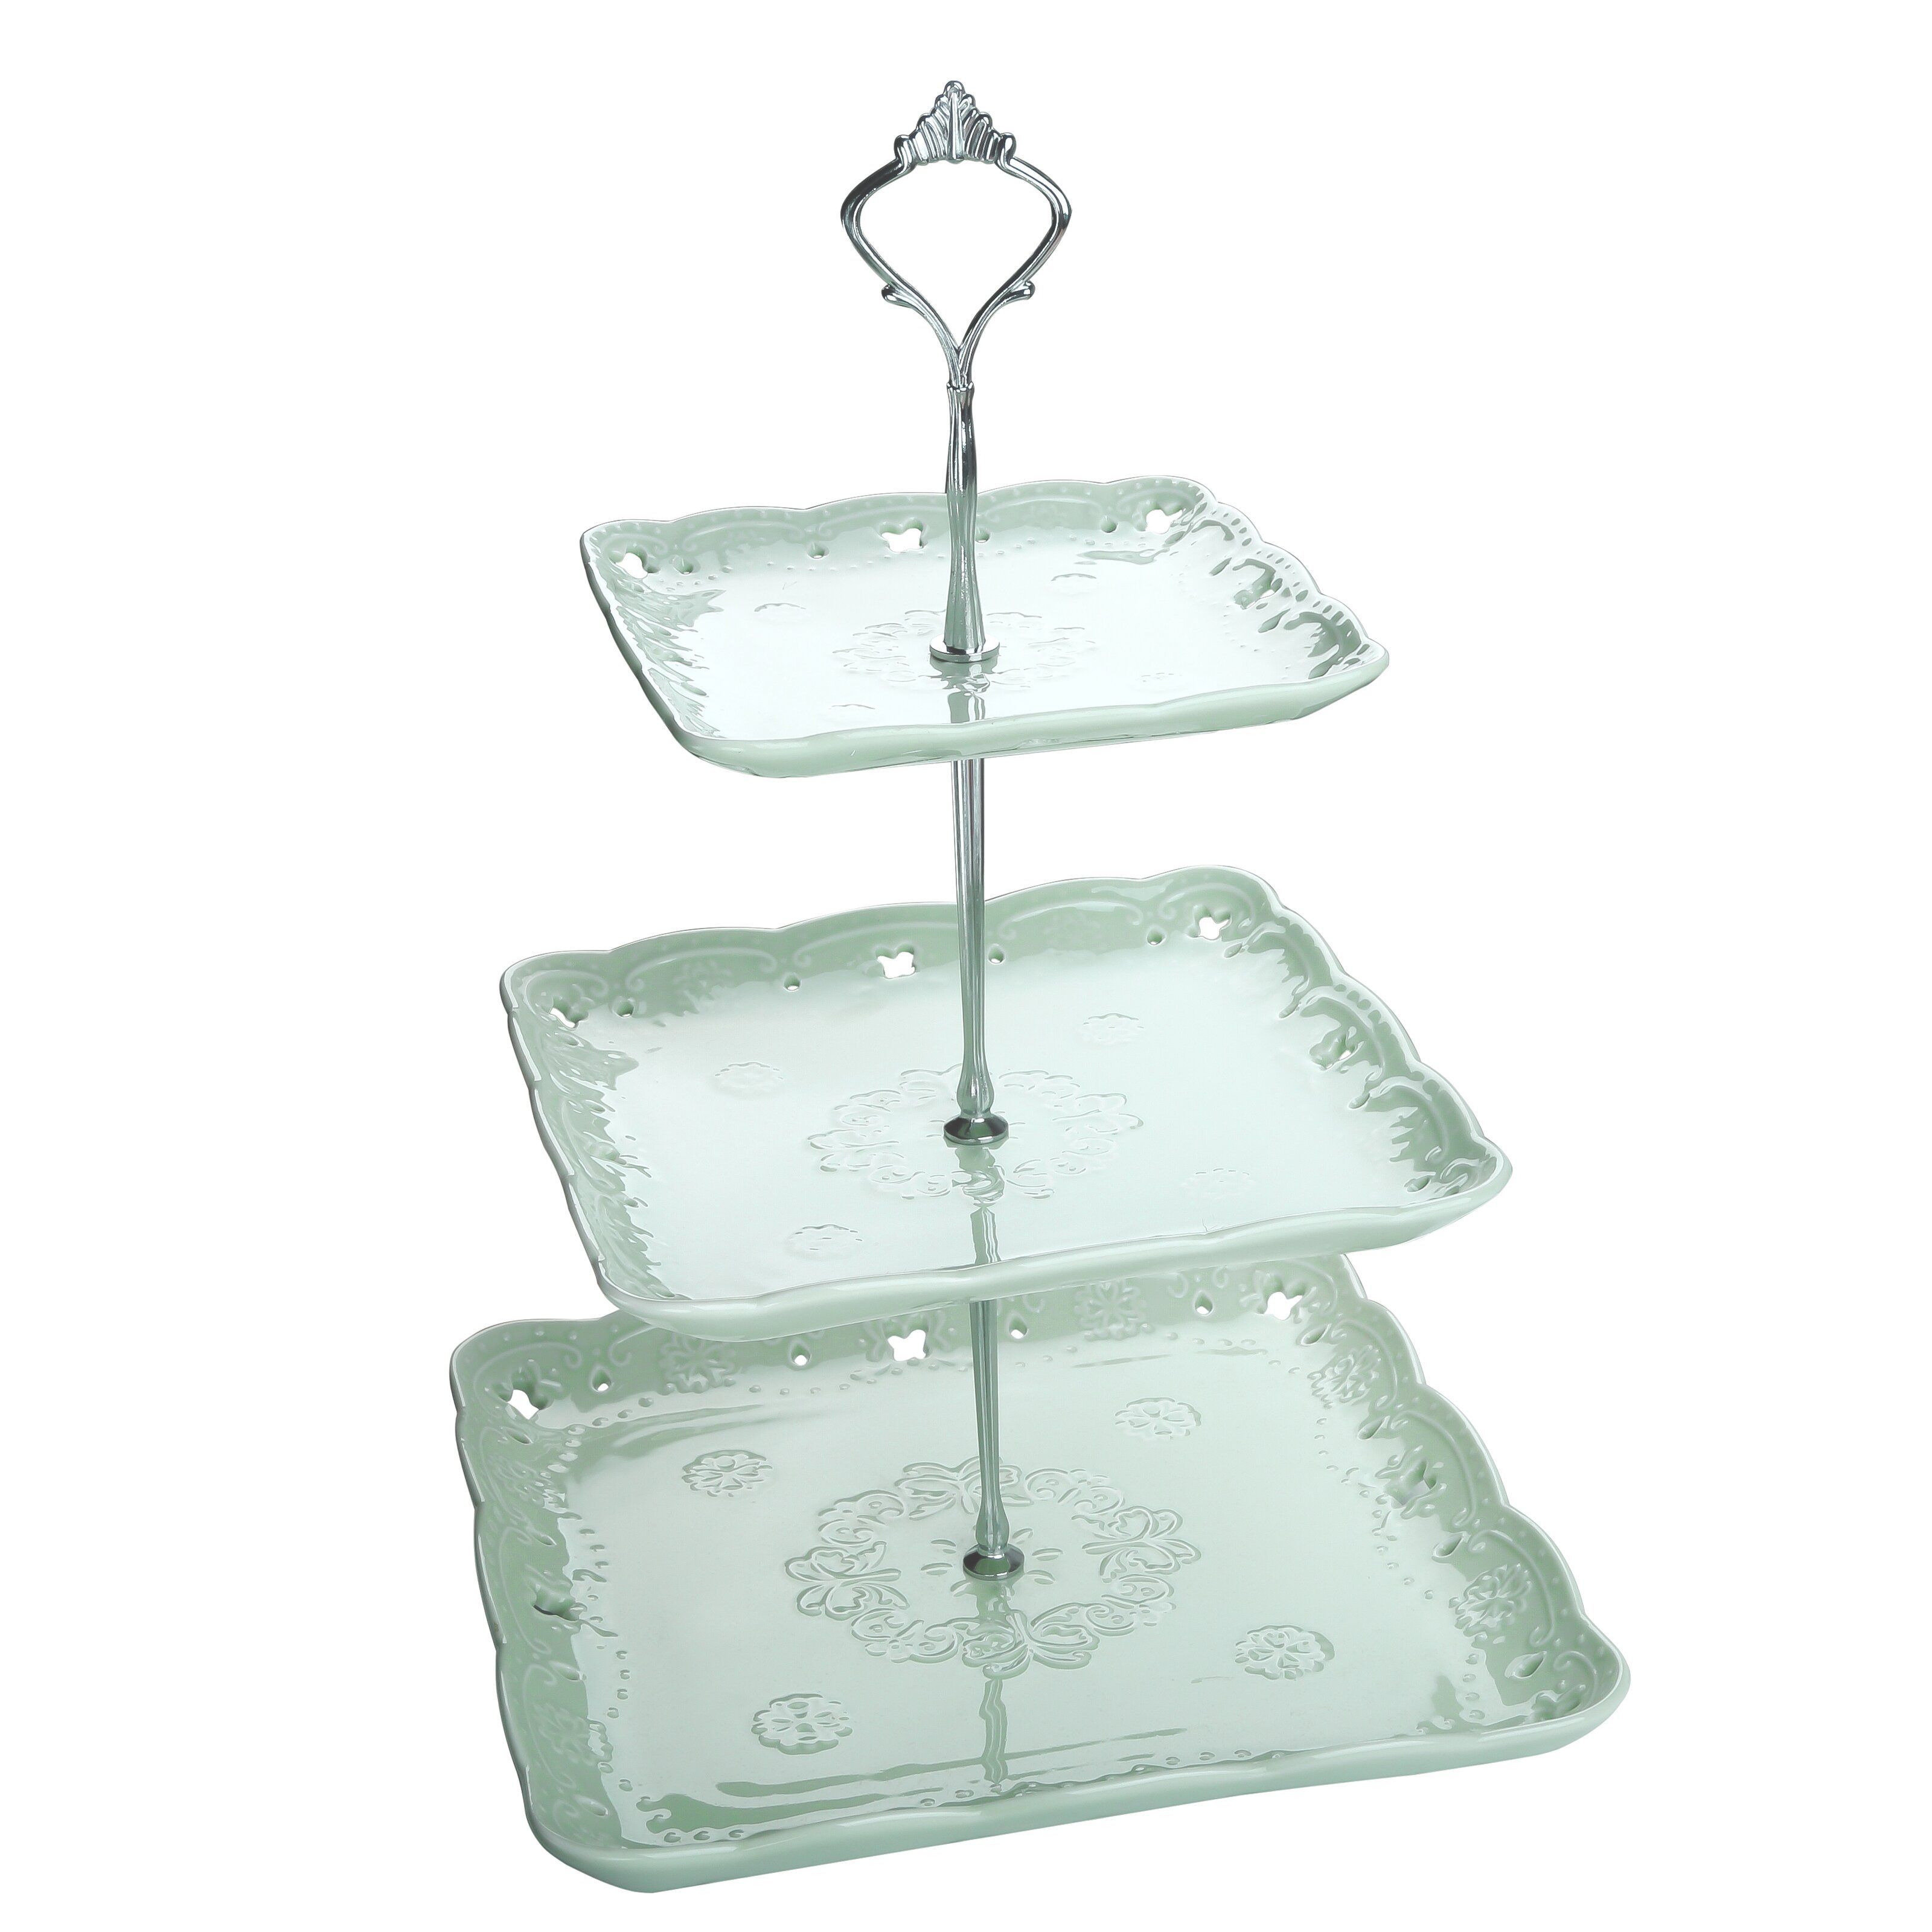 Floral 3-Tier Cake Serving Stand